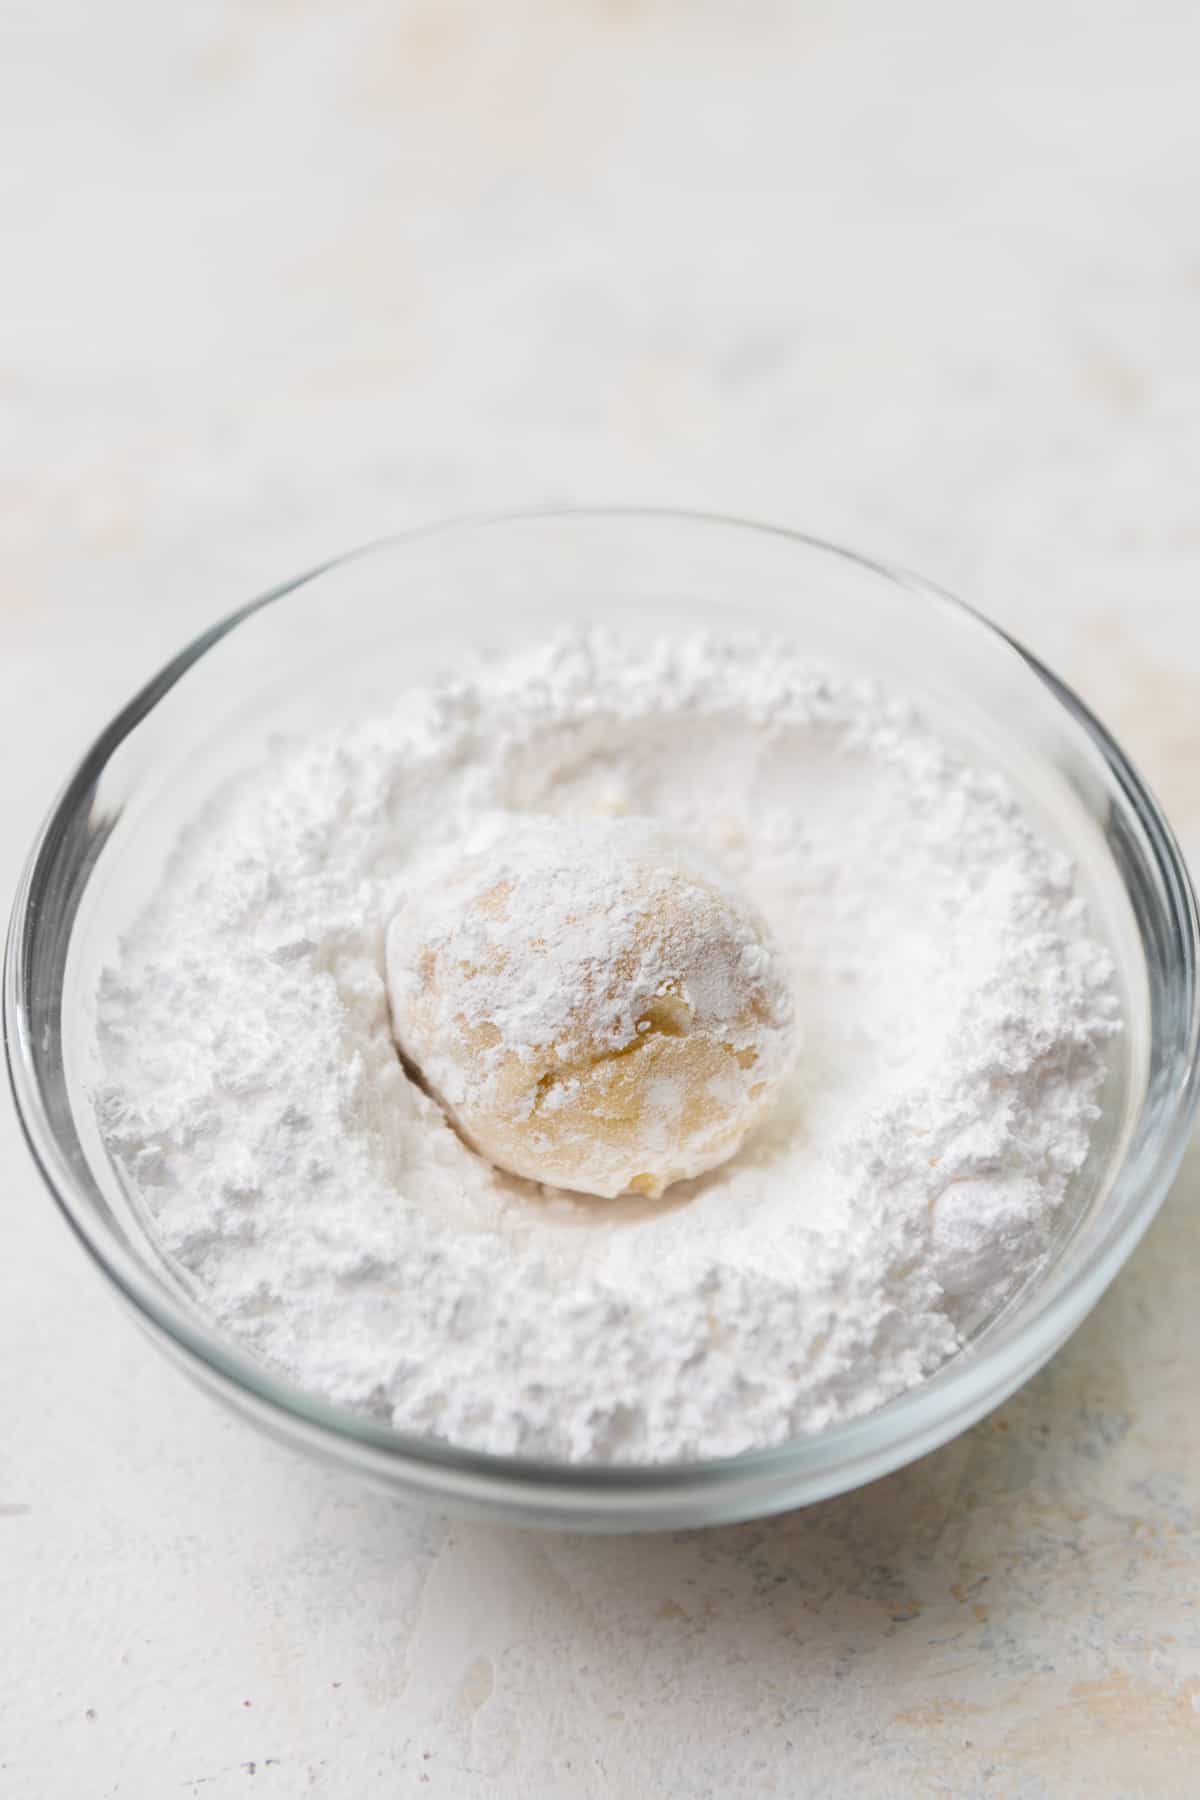 A cookie dough ball in a bowl of powdered sugar.